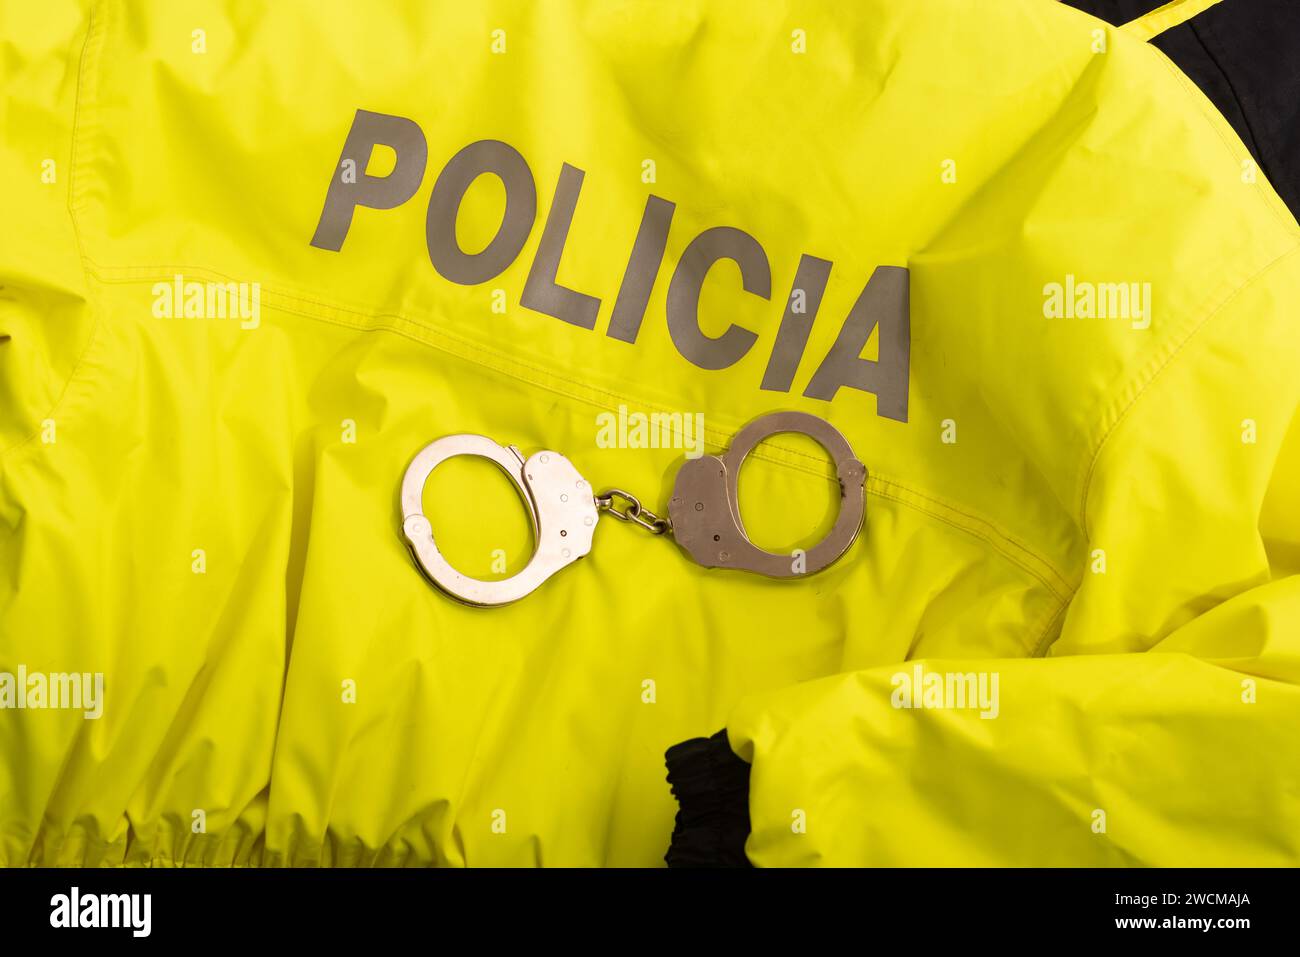 Yellow police uniform with handcuffs. Enforcement and public safety Stock Photo